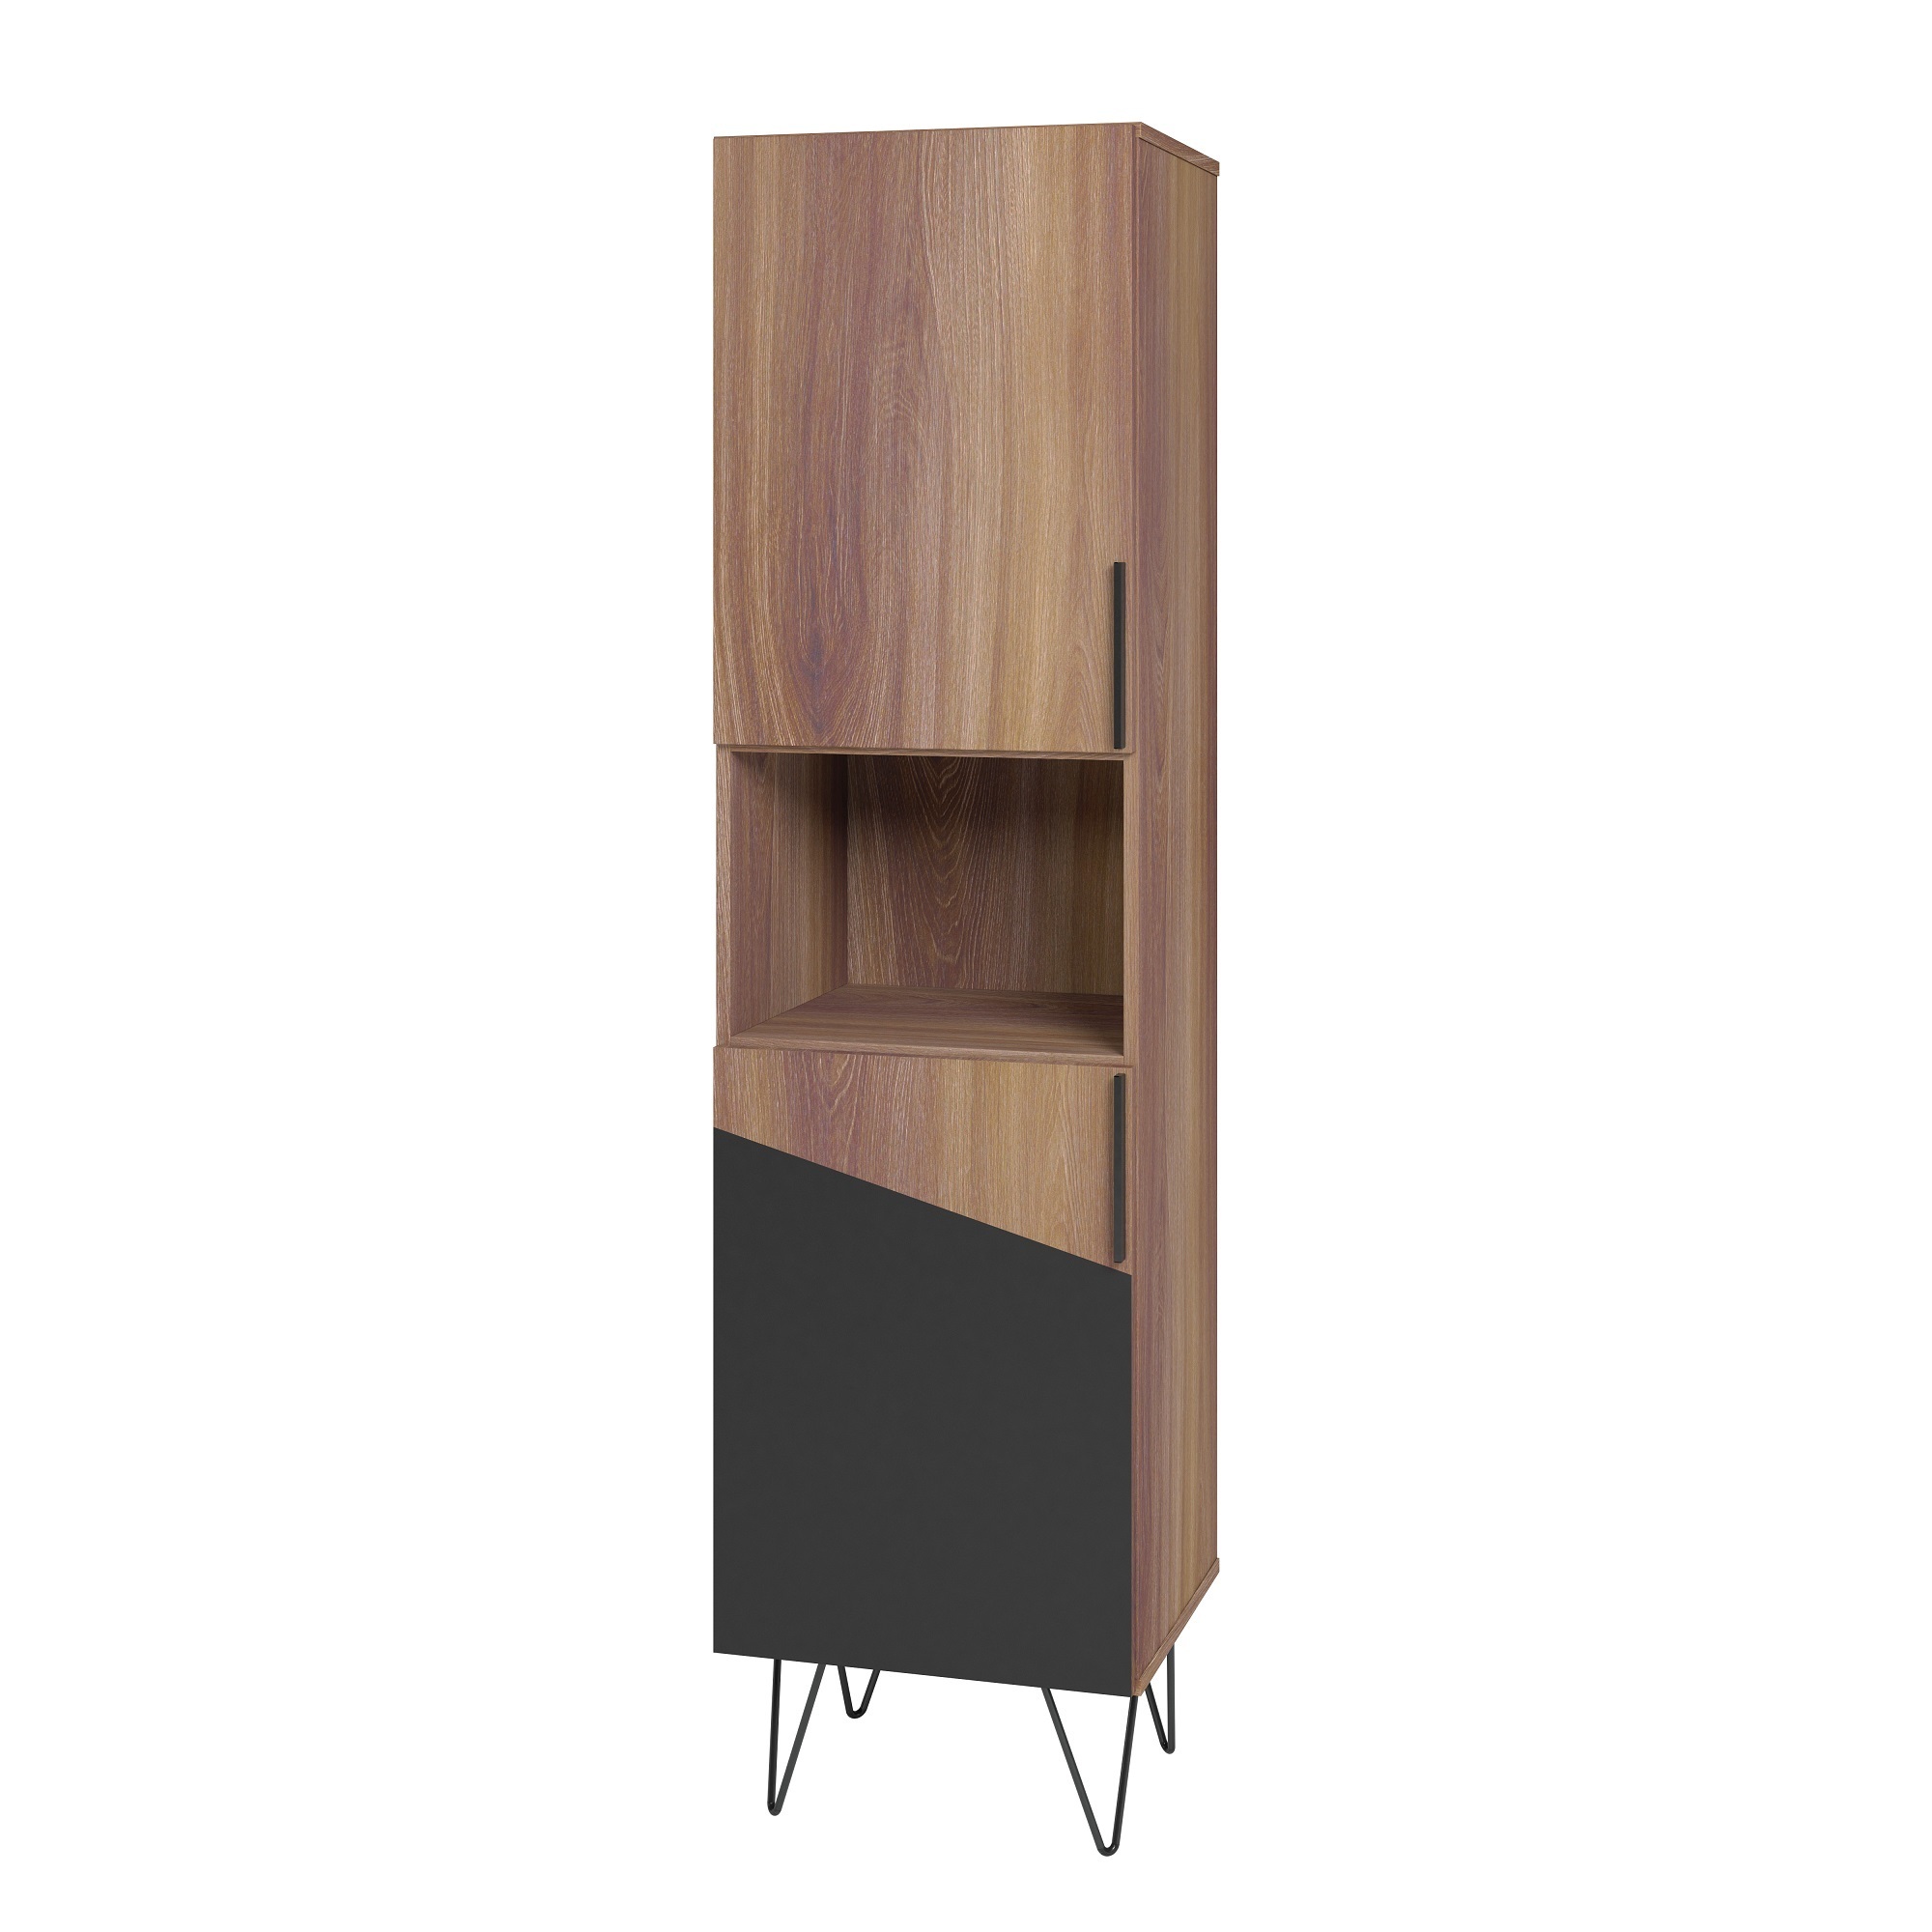 Manhattan Comfort, Beekman 17.51 Narrow Bookcase in Brown and Black, Height 67.32 in, Shelves (qty.) 5 Material MDPE, Model 404AMC